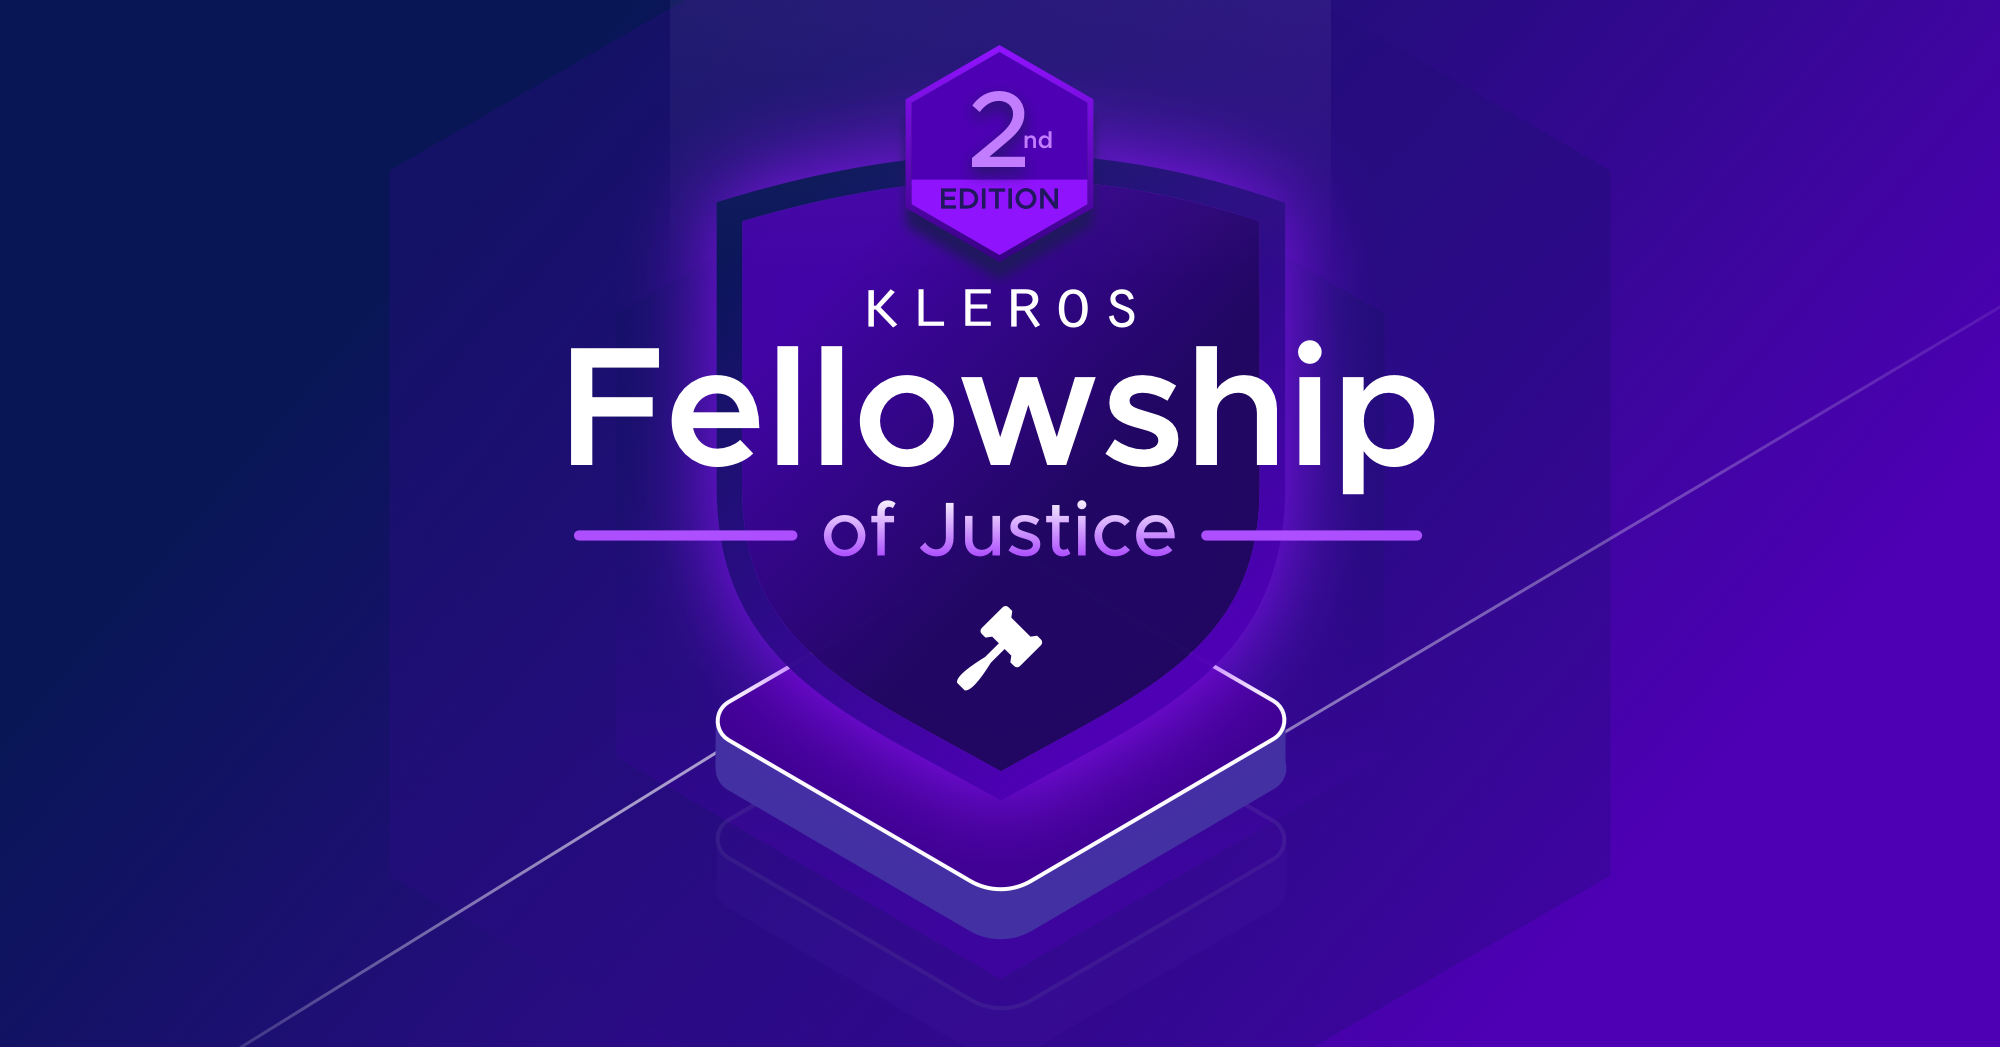 Launching the Kleros Fellowship - Second Edition